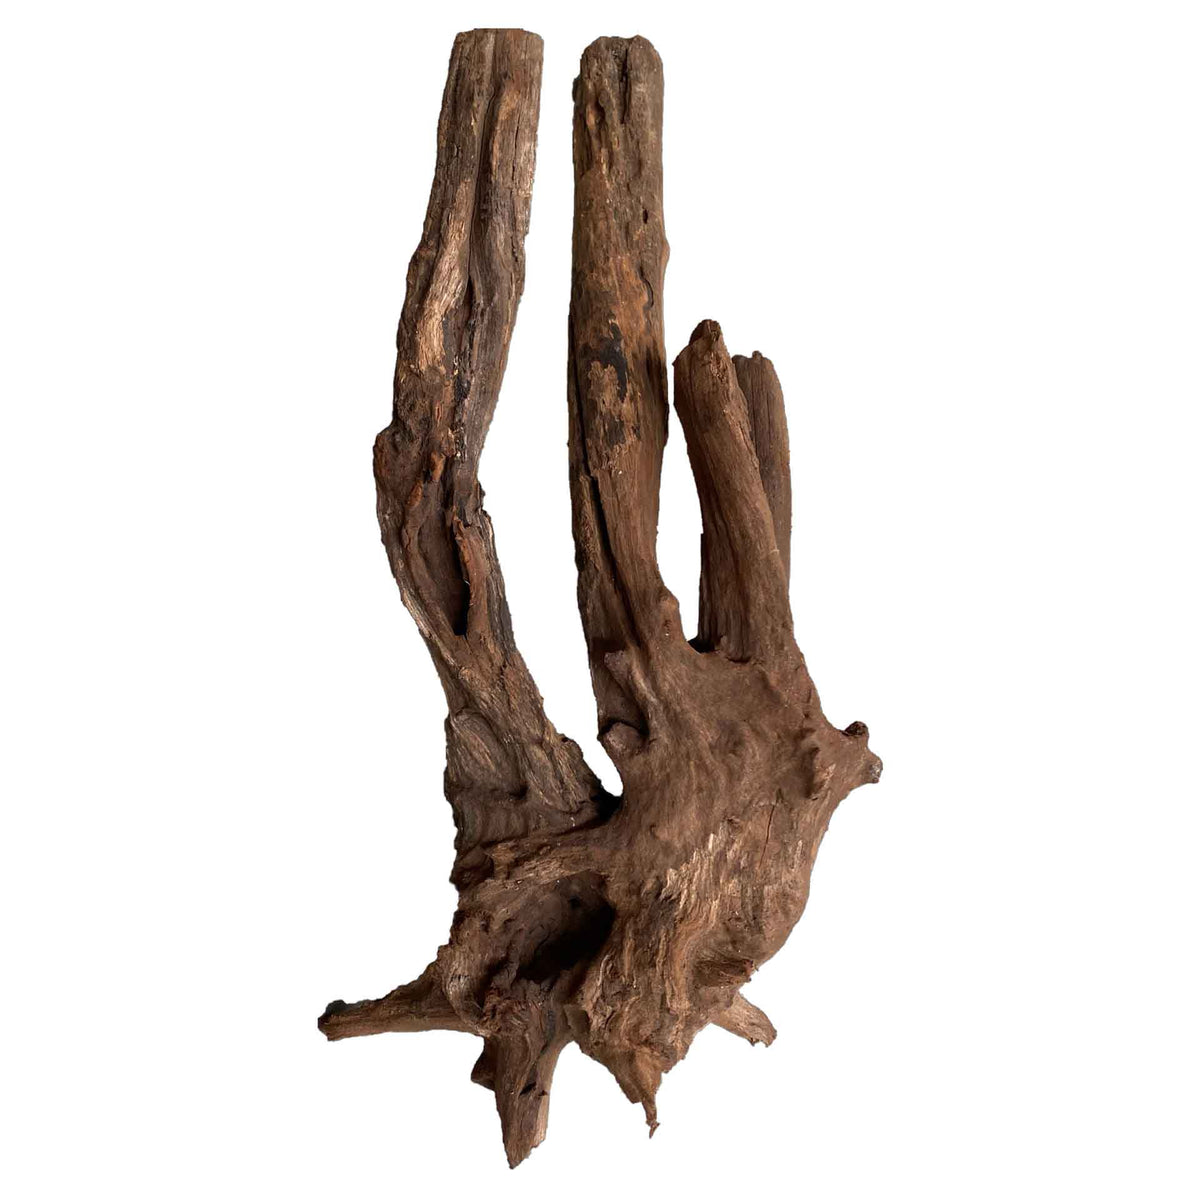 Dymax Driftwood Small - In Store Pick Up Only